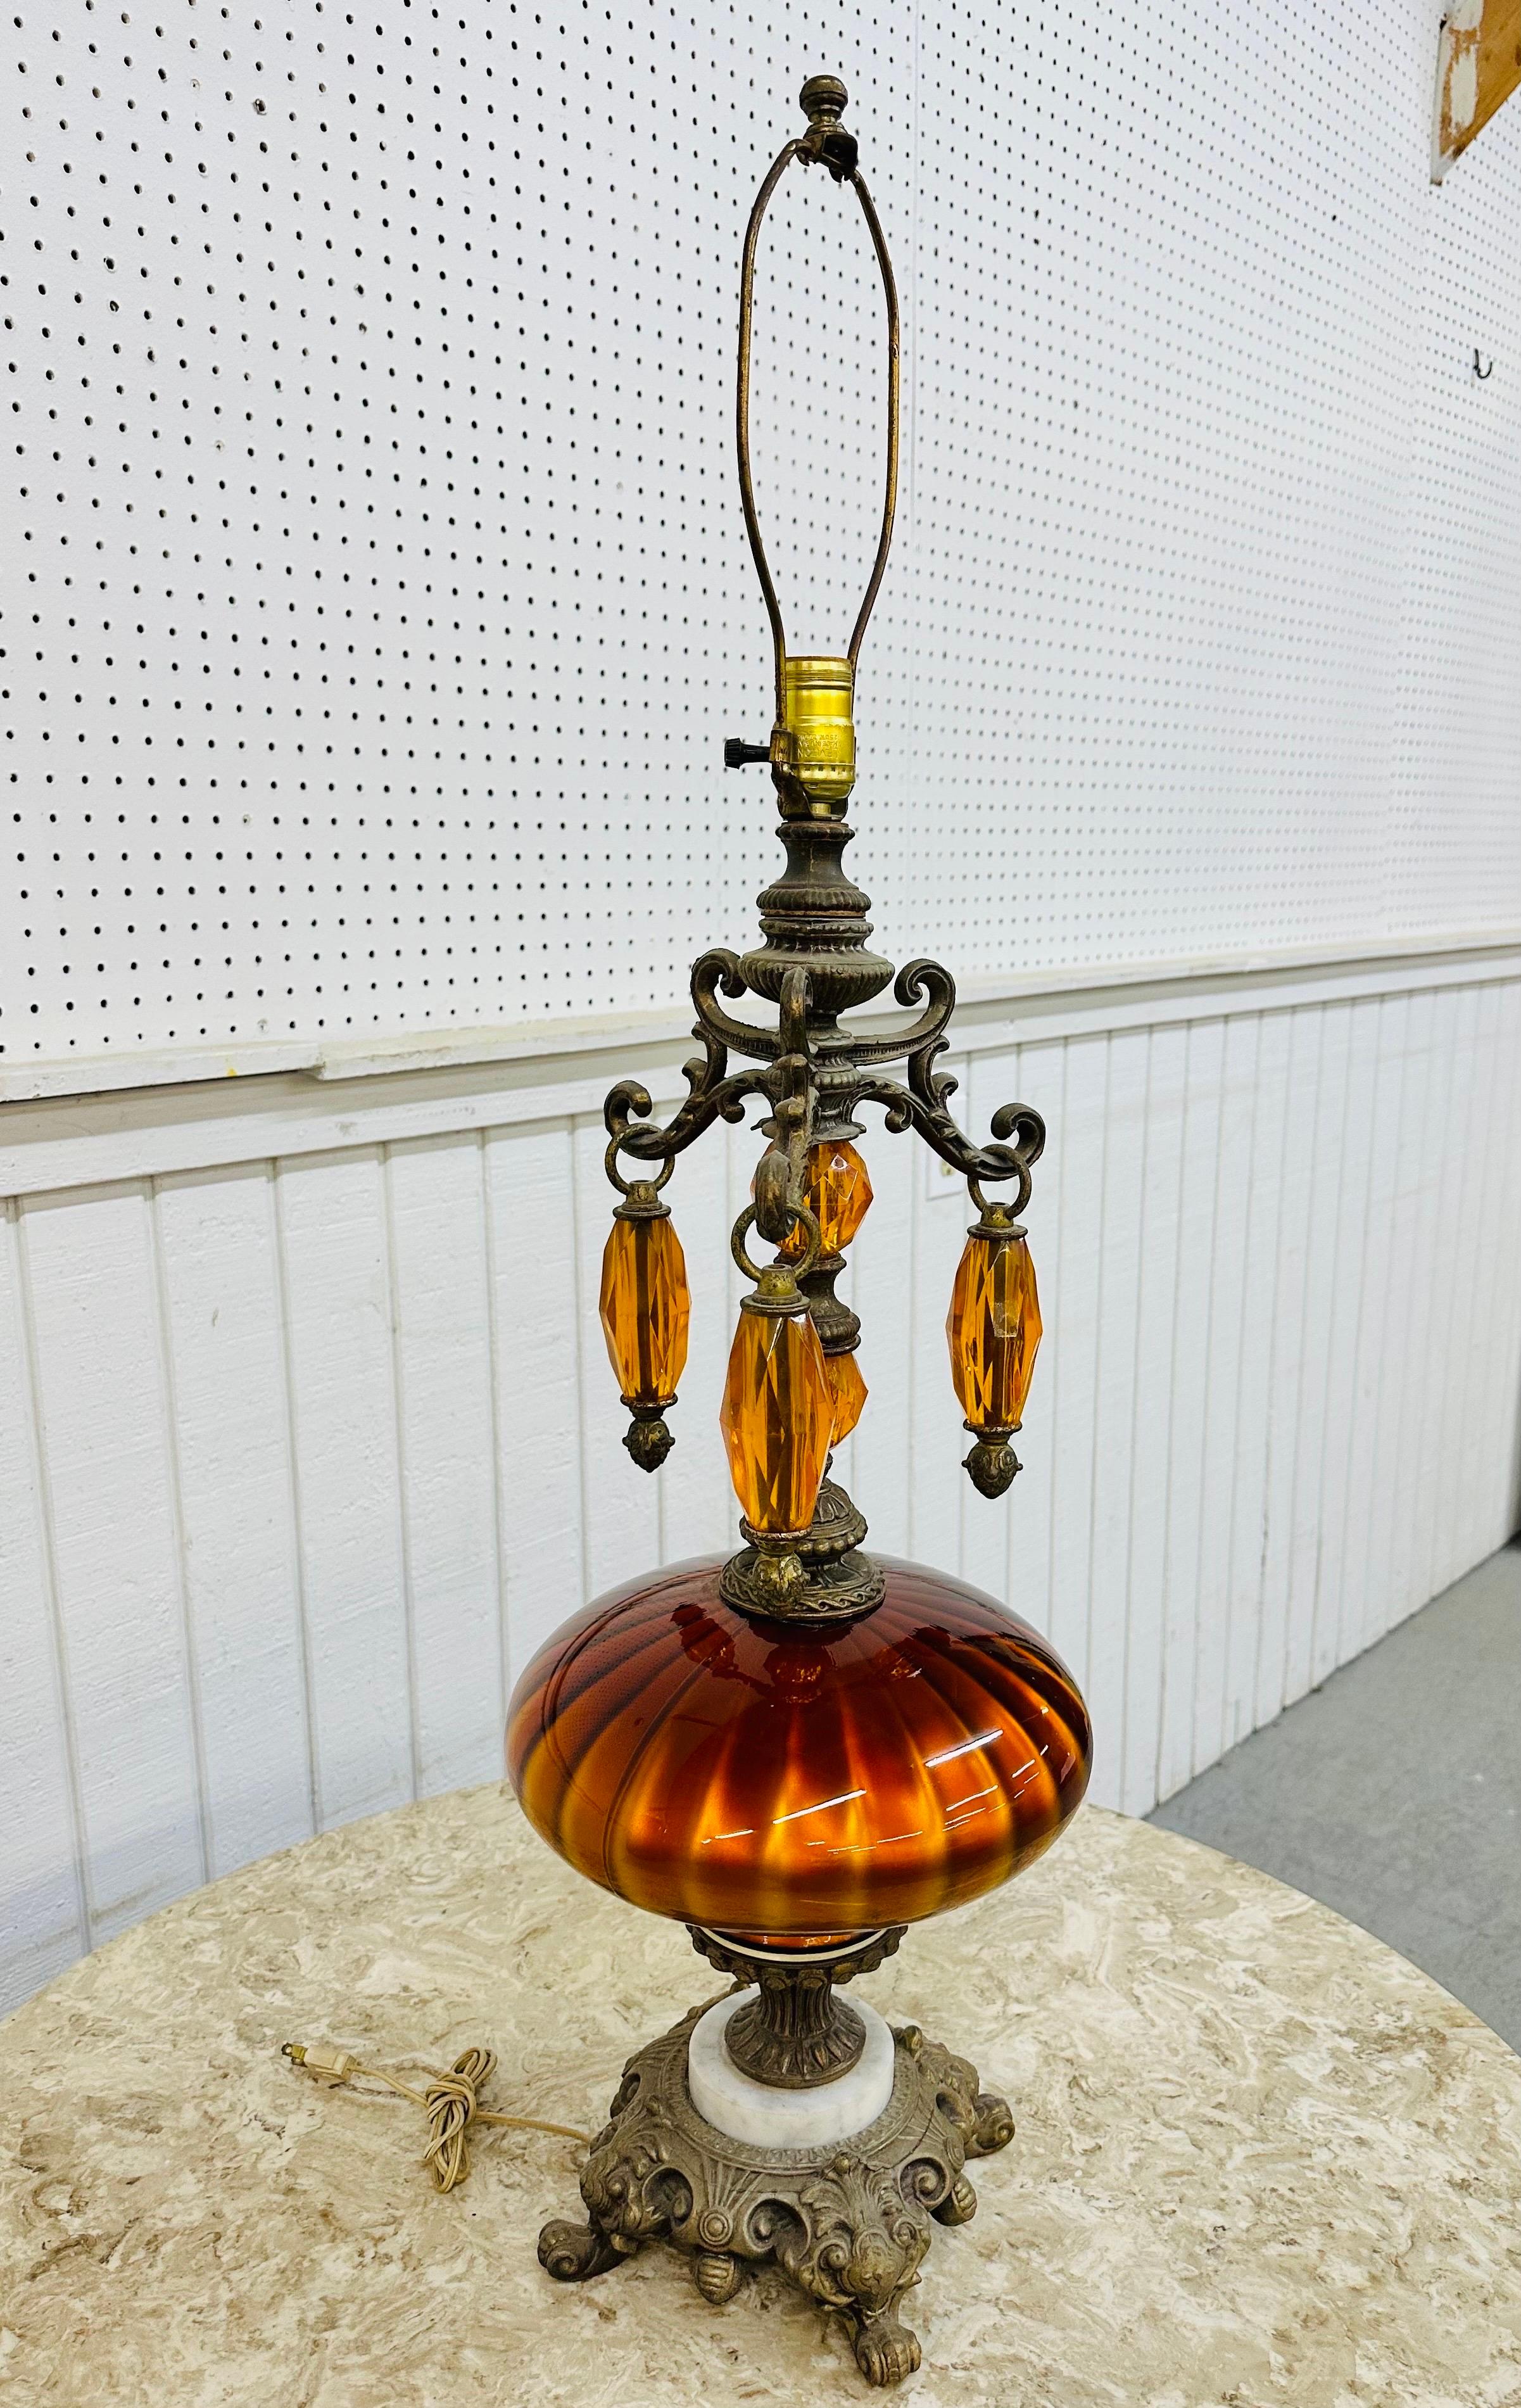 This listing is for a vintage Hollywood Regency Style Orange Glass Table Lamp. Featuring a brass and marble base, an orange glass body, three hanging lucite prisms, and original harp and cord. This is an exceptional combination of quality and design!